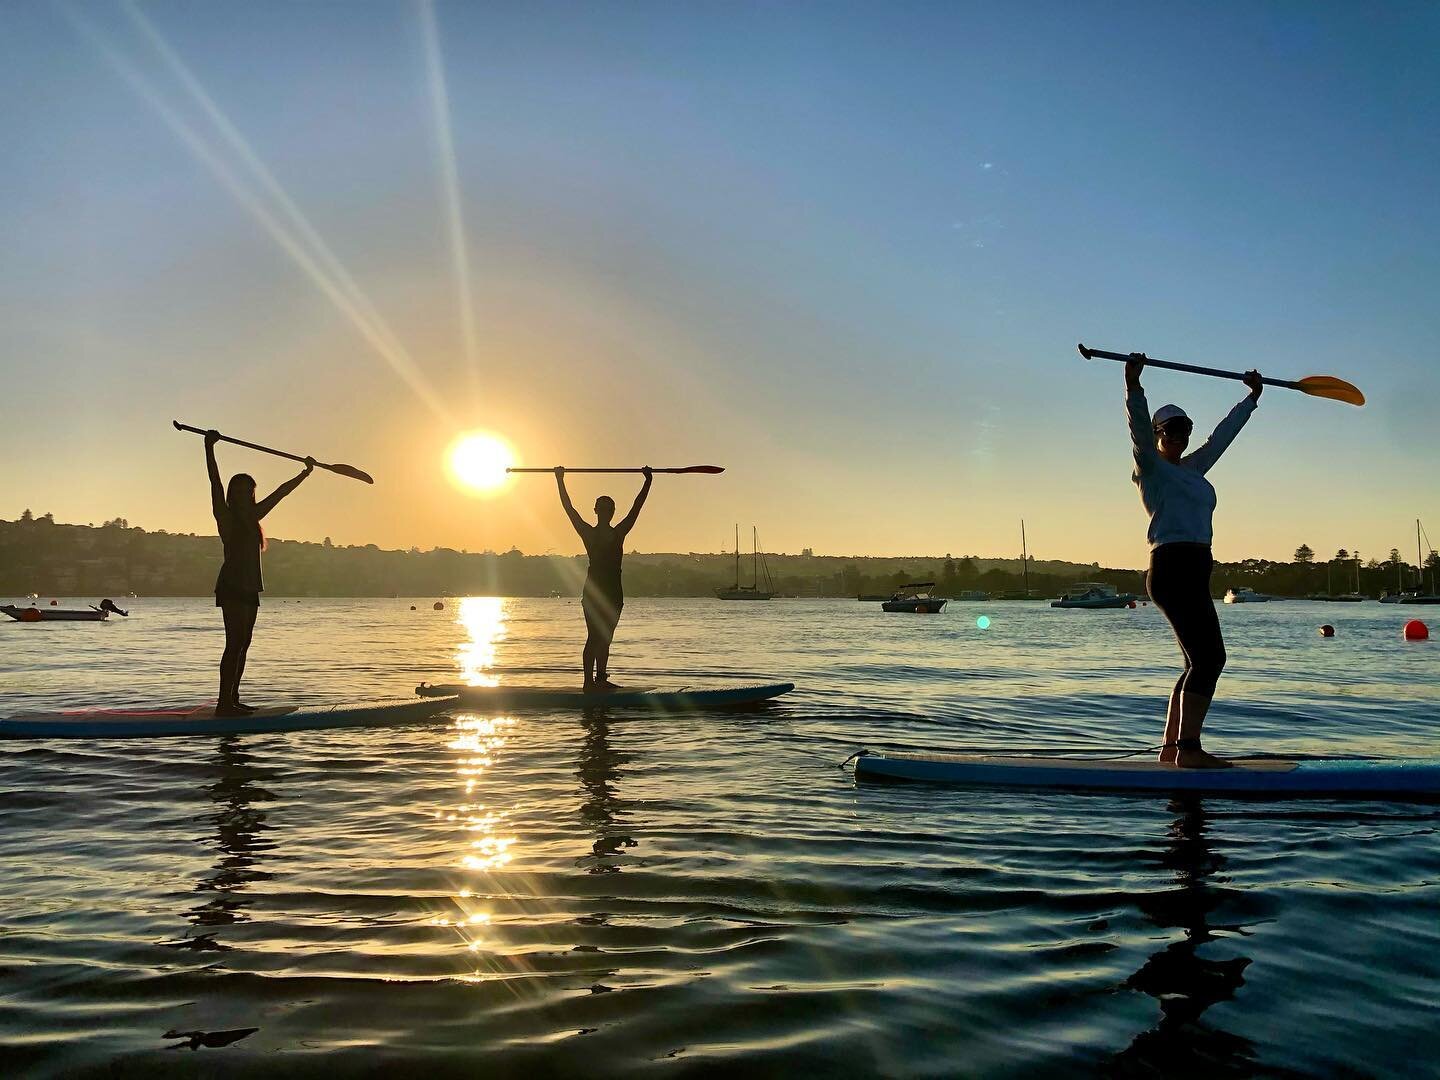 IT&rsquo;S THE WEEKEND!! 🥳
.
And we&rsquo;re jolly excited to hit the water! 🤪 #adventureawaits
.
.
.
.
.
#shesups #sunrise #sunrisephotography #sunriseoftheday #supchat #shepaddles #standuppaddleboarding #paddleboarding #oceanlover #oceanlife #oce